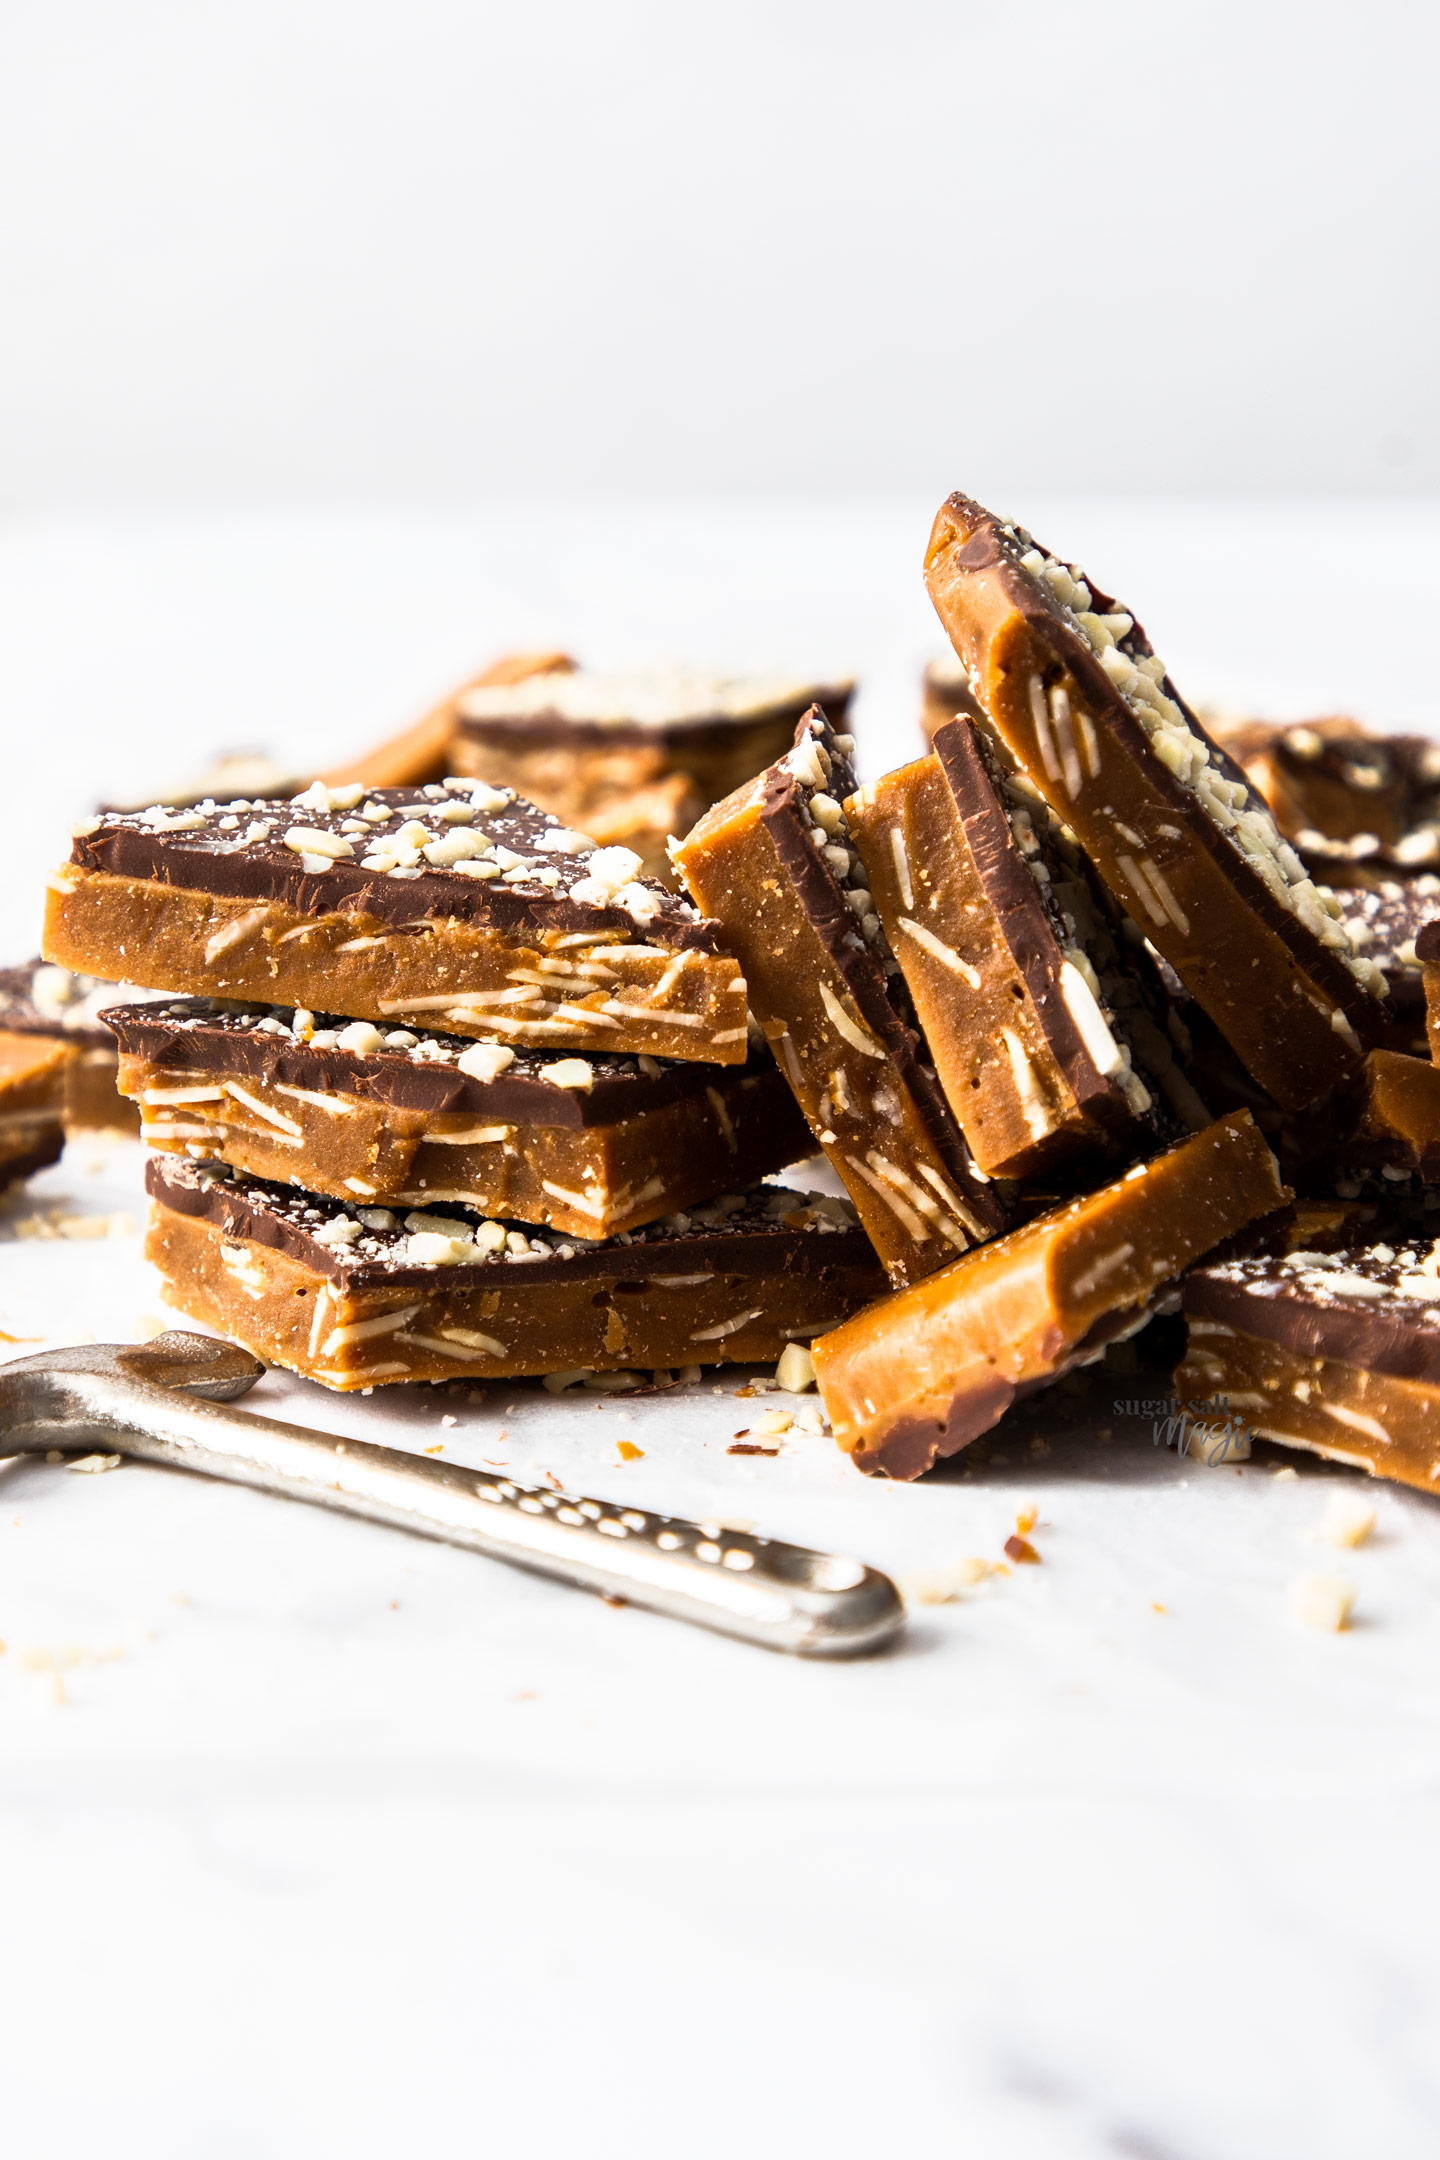 A stack of buttercrunch toffee that's fallen over.